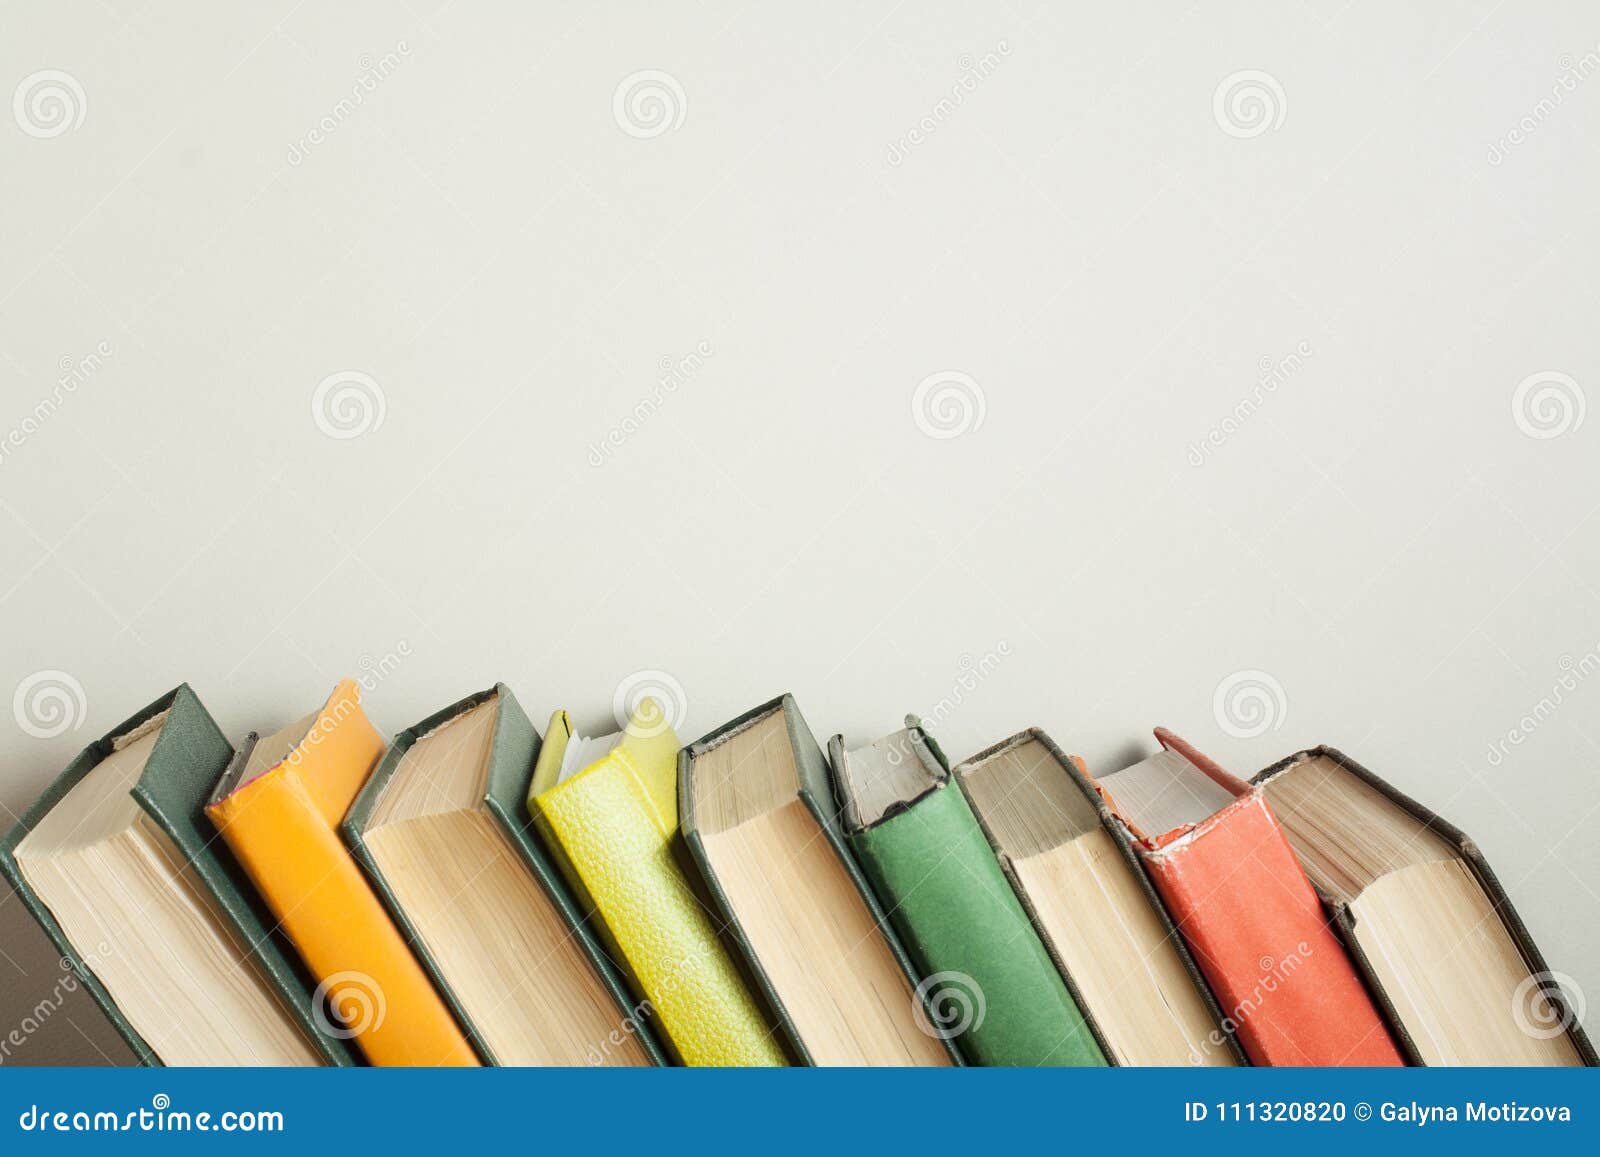 Stack Of Colorful Books On Wooden Desk Copy Space For Text Back